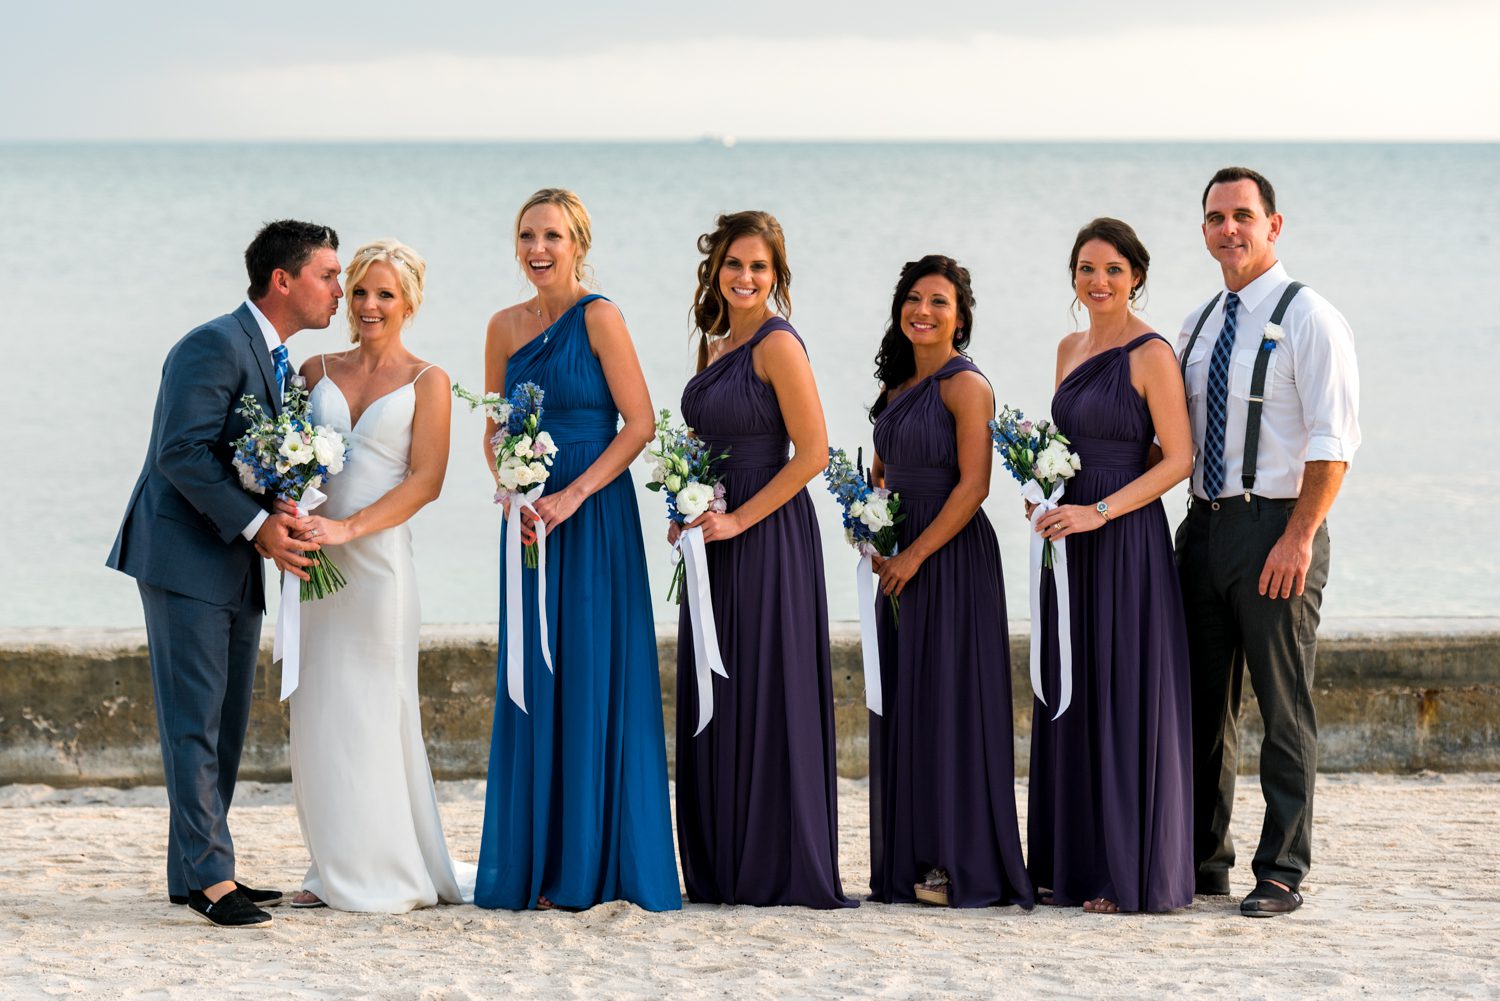 A group of bridesmaids and groomsmen at the Key West Garden Club wedding venue.